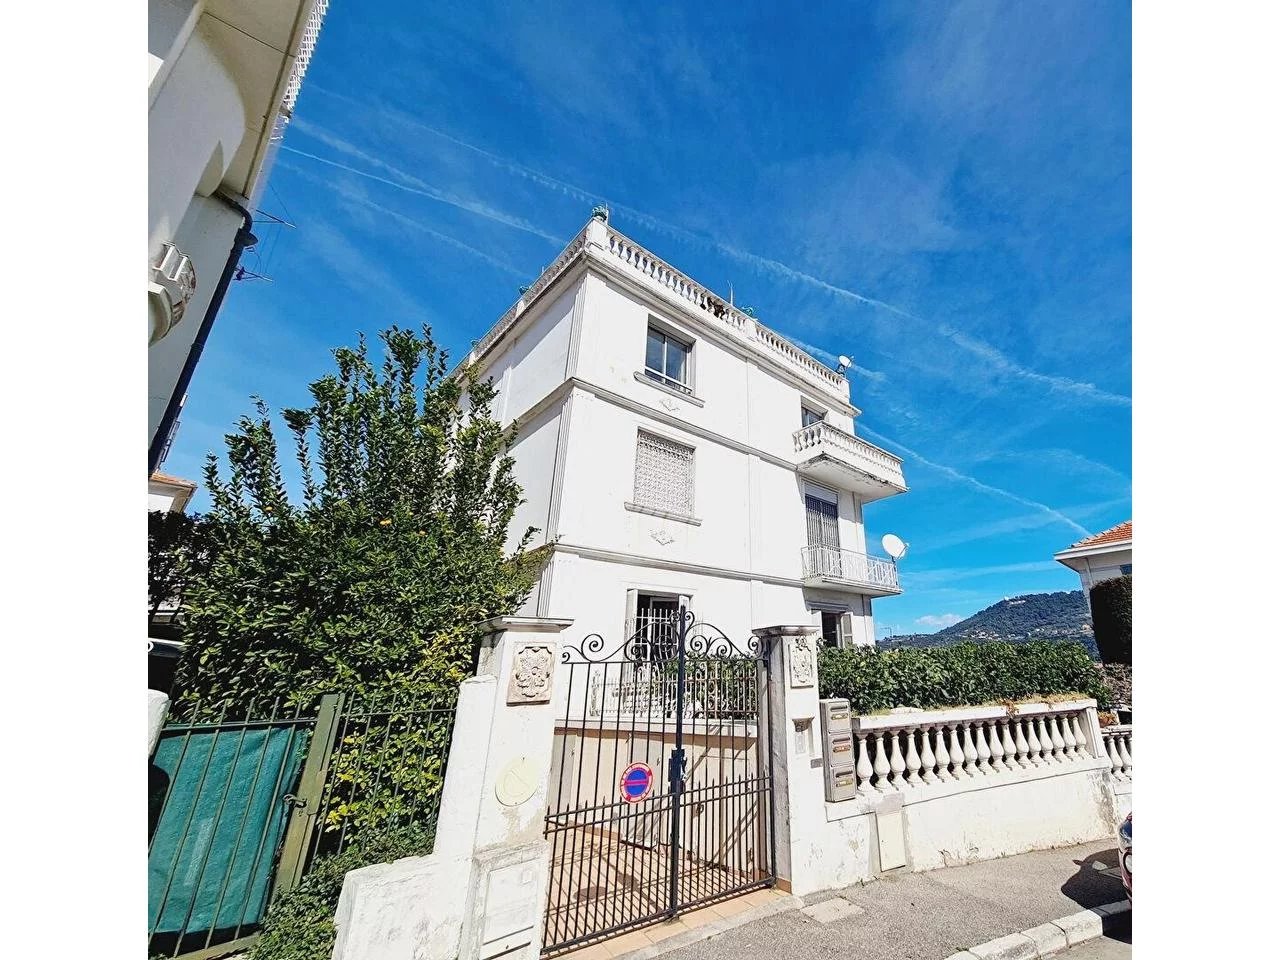 Appartement  4 Rooms 82.65m2  for sale   429 000 €